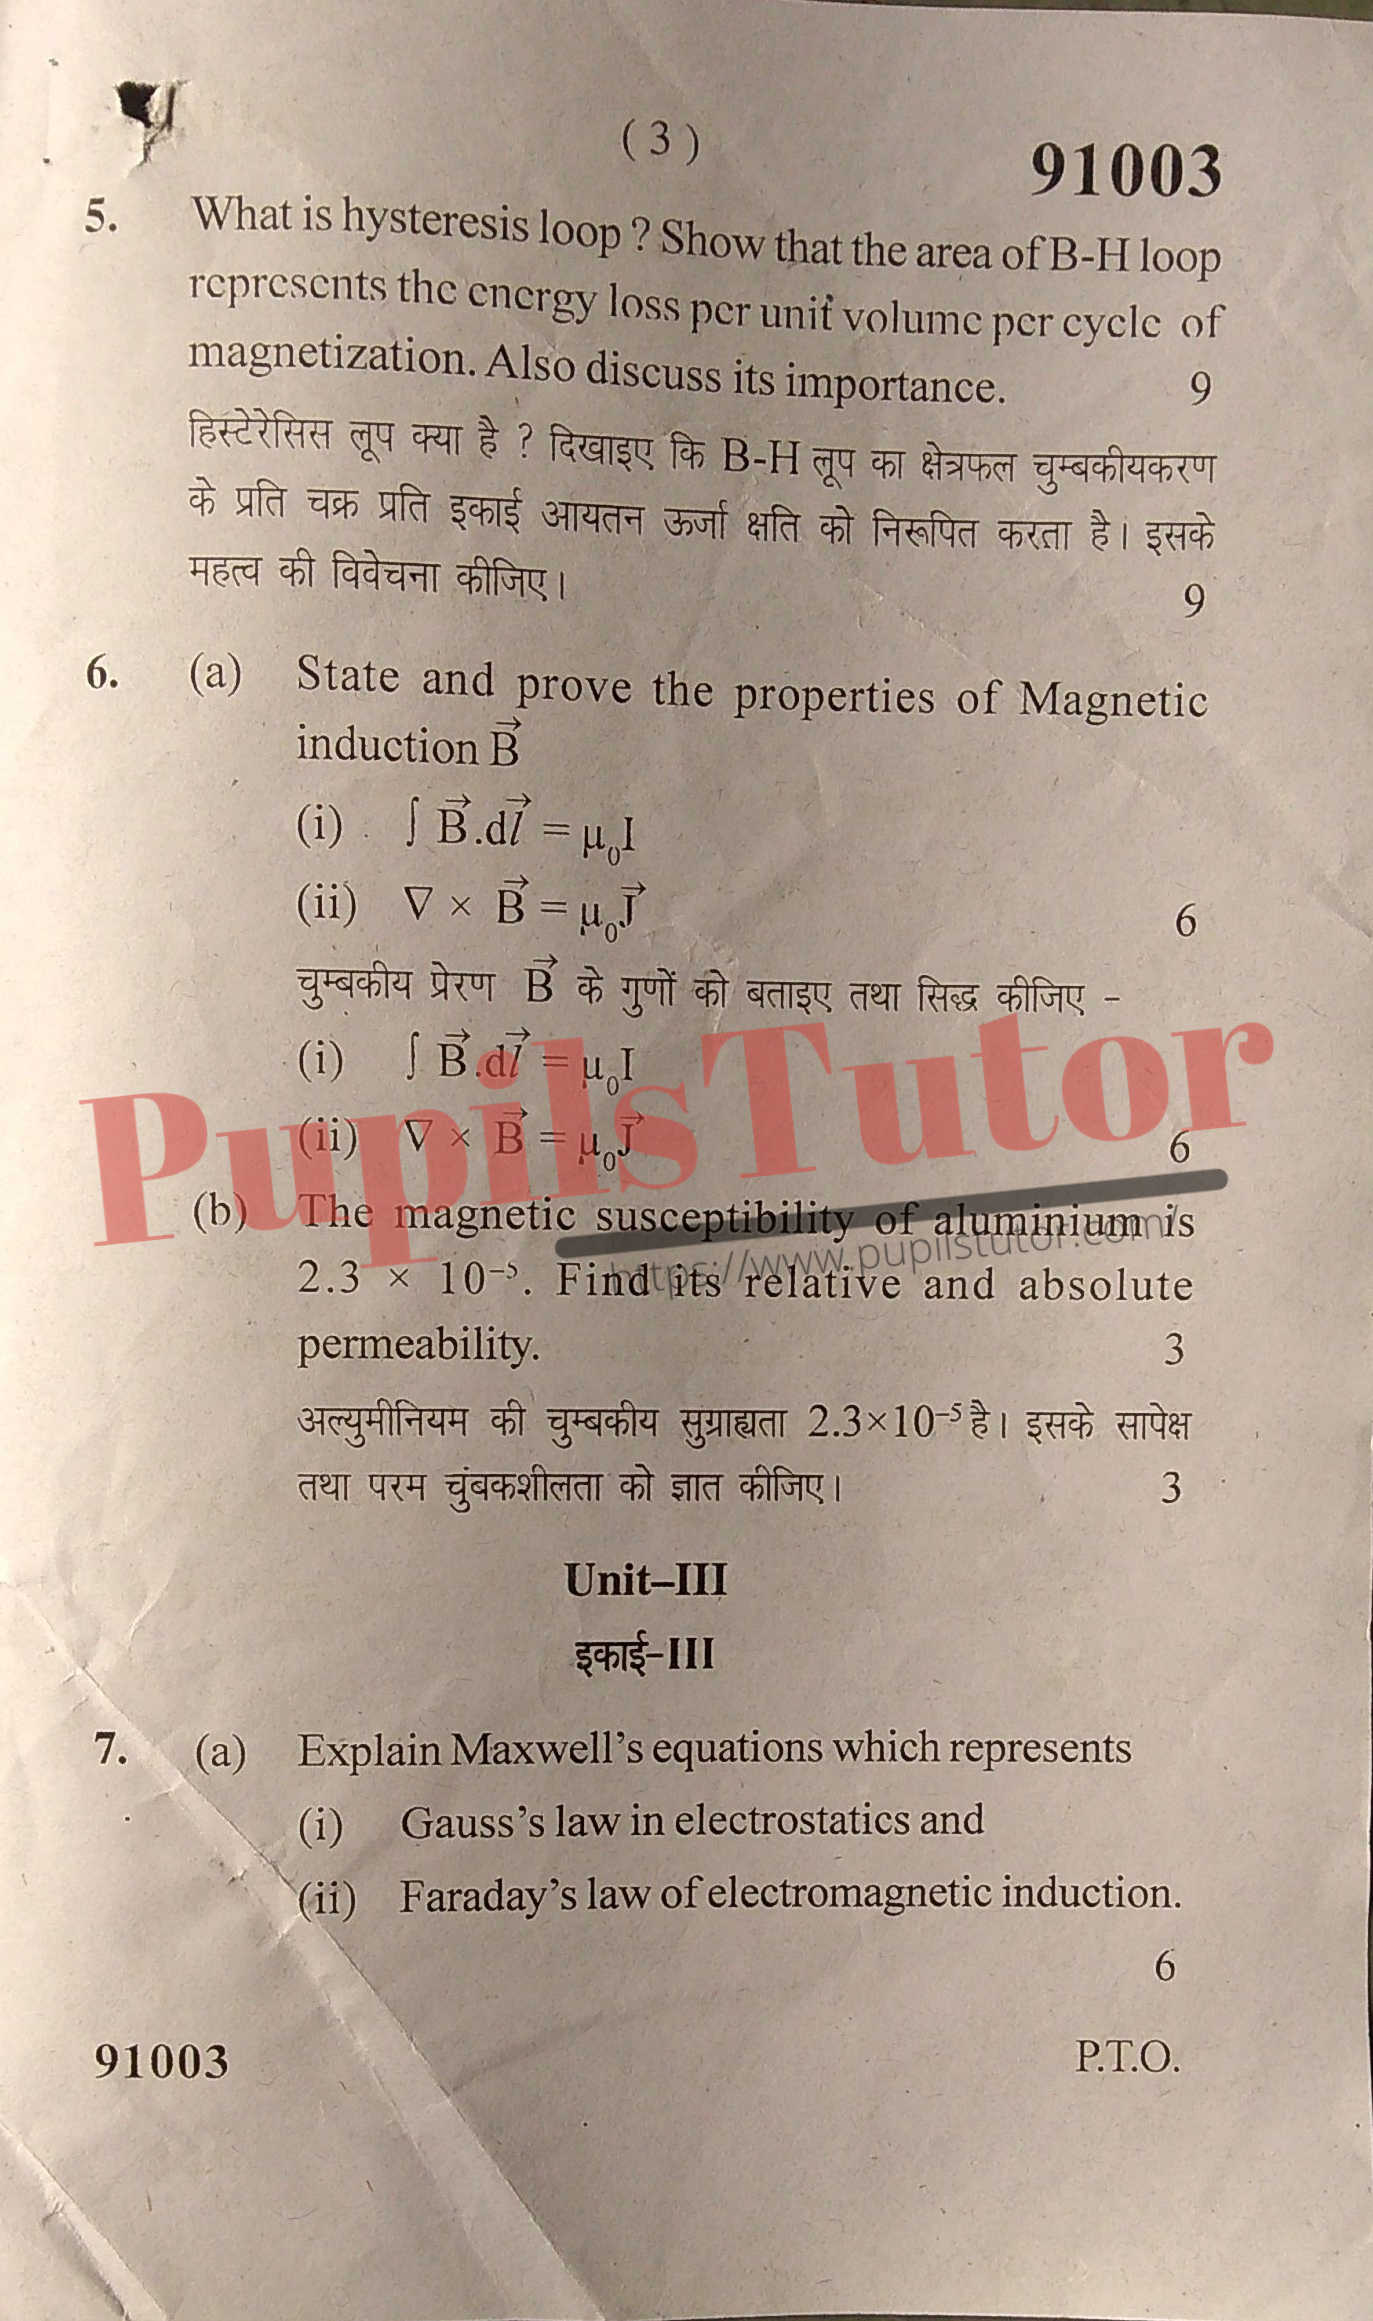 Free Download PDF Of M.D. University B.Sc. [Physics] First Semester Latest Question Paper For Electricity And Magnetism Subject (Page 3) - https://www.pupilstutor.com